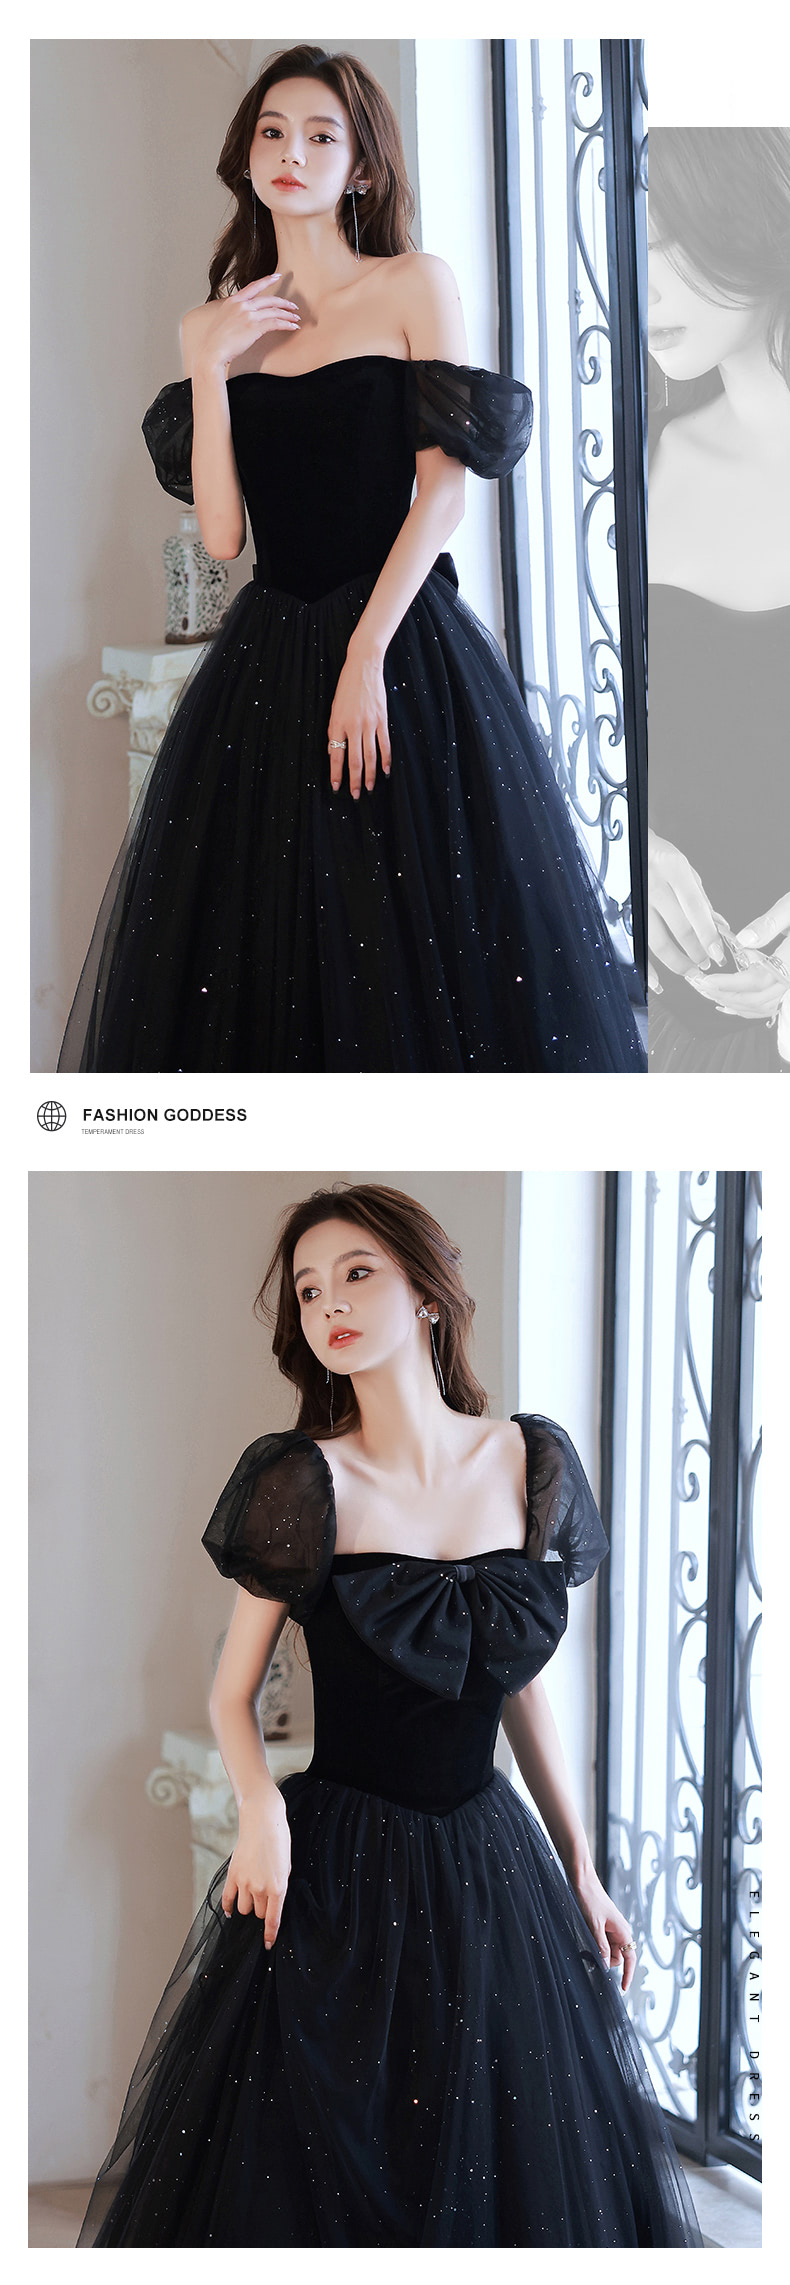 Black-Prom-Evening-Maxi-Dress-Homecoming-Outfit-with-Bowknot11.jpg